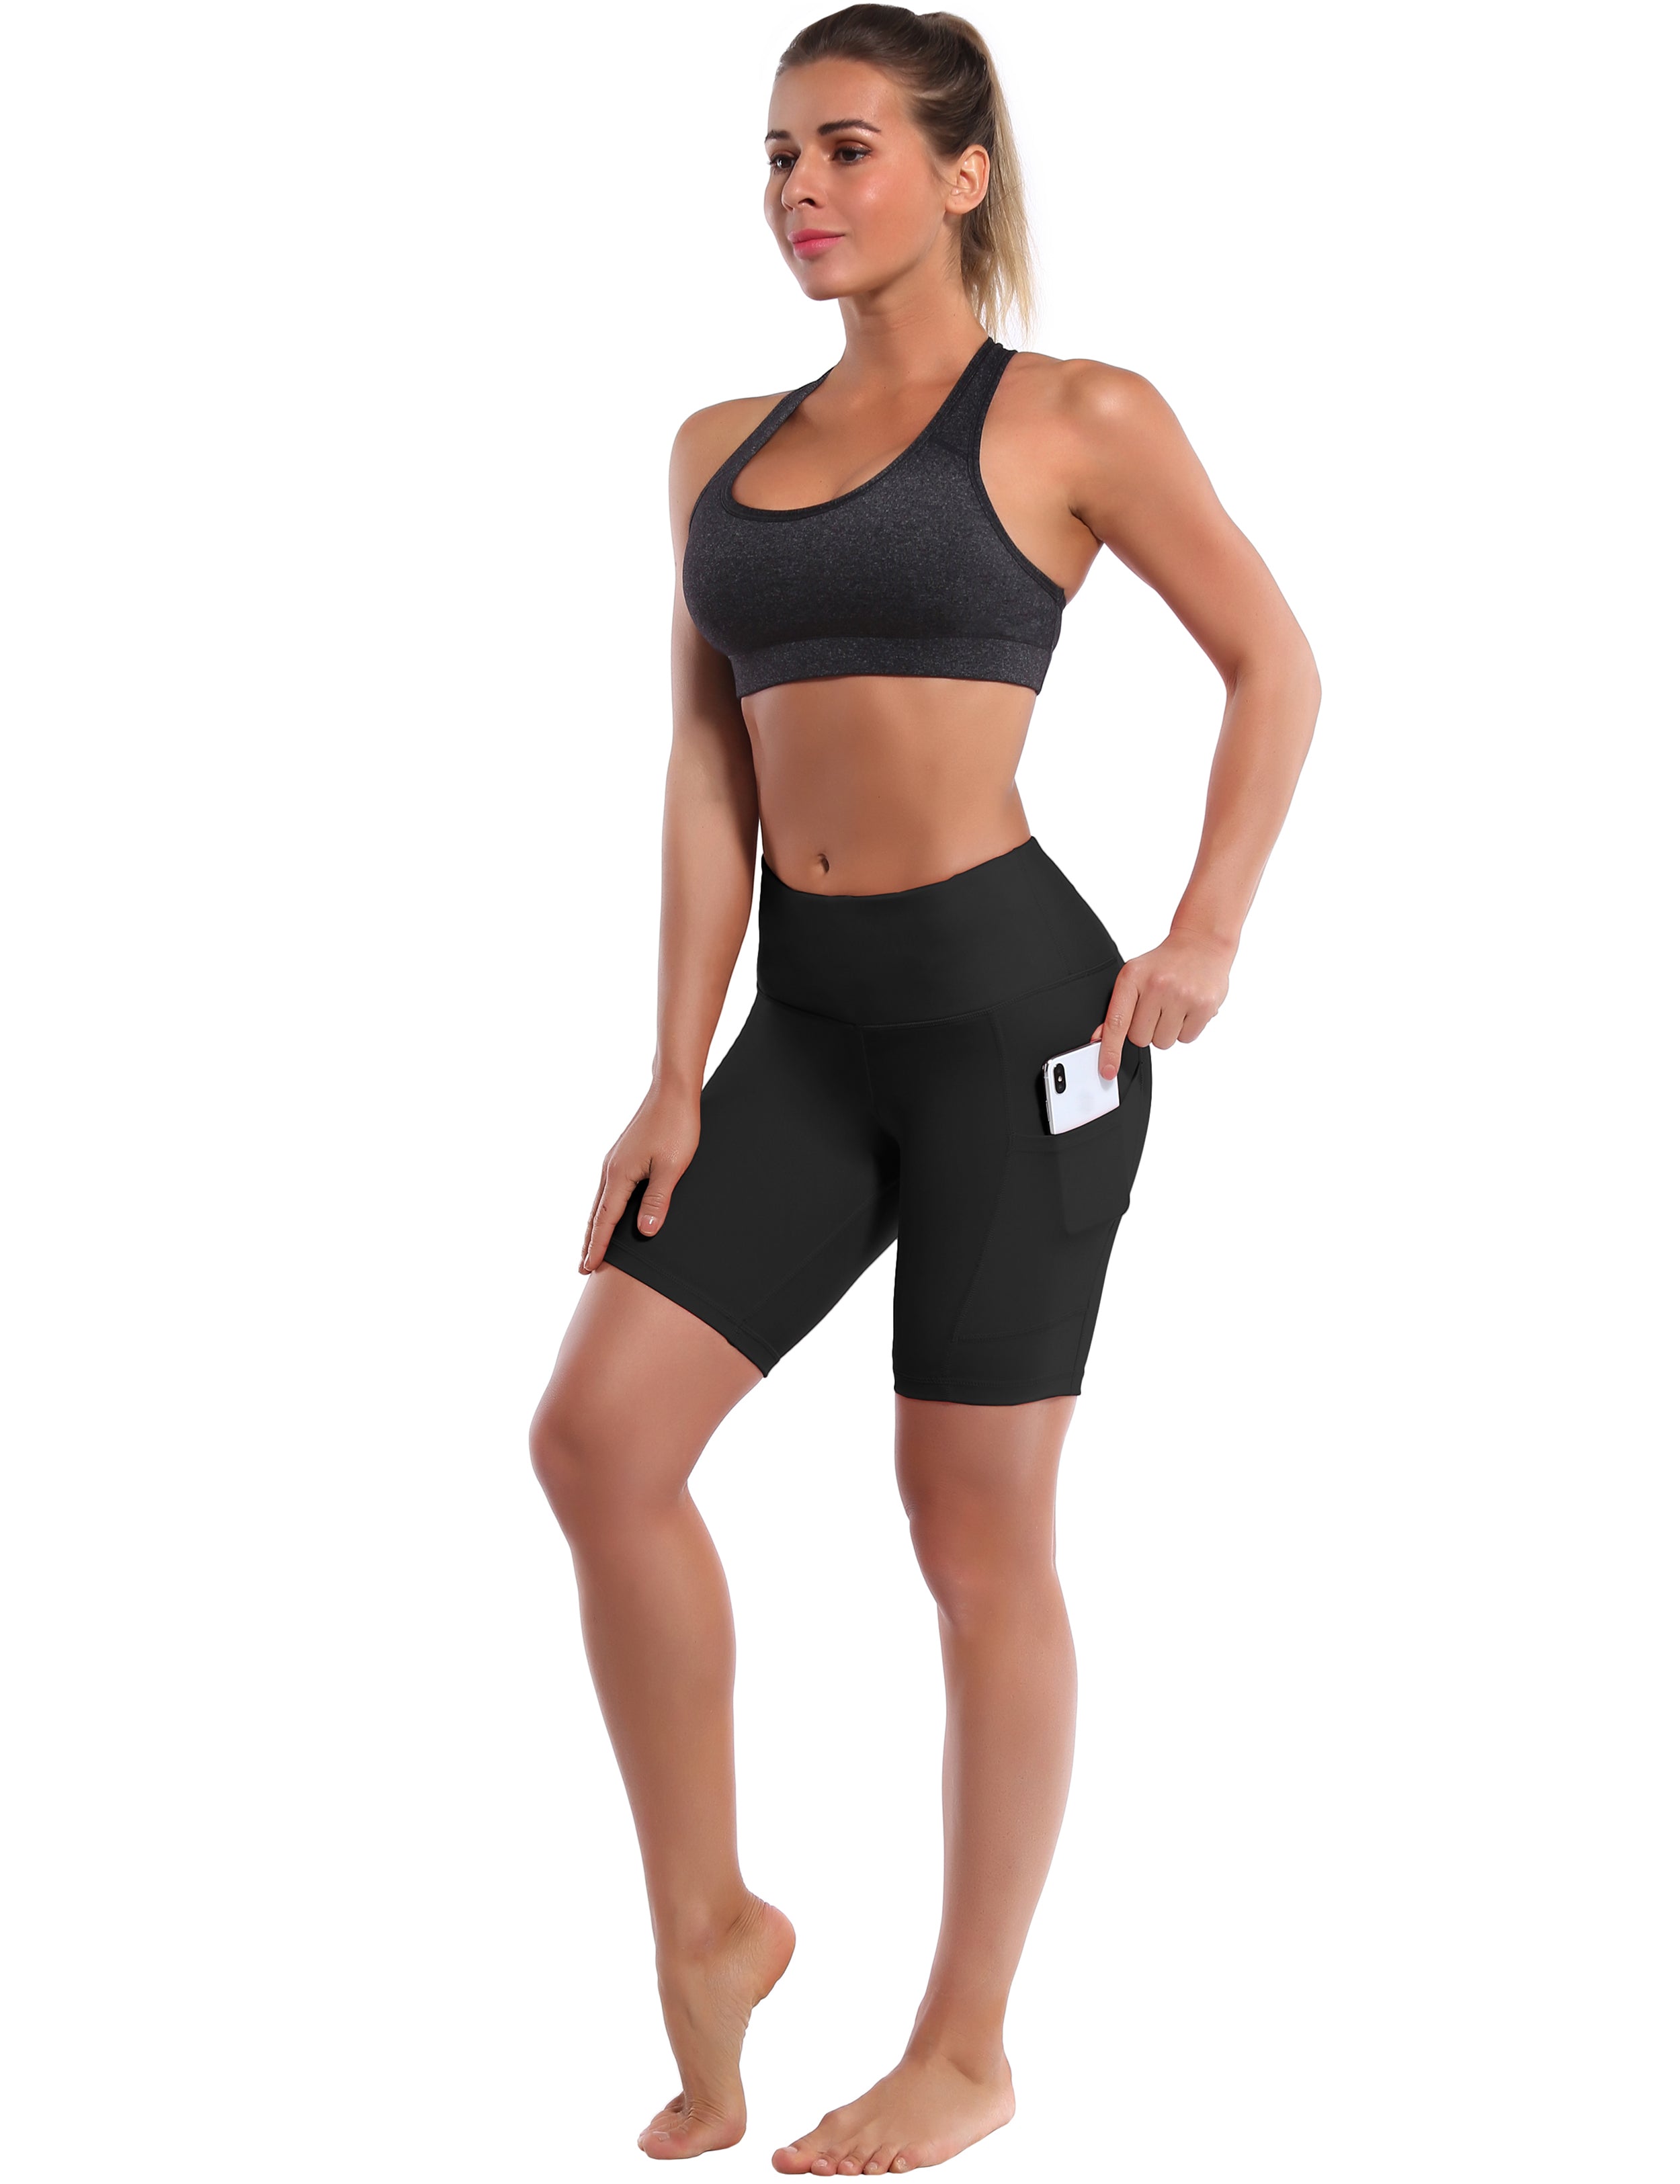 8" Side Pockets yogastudio Shorts black Sleek, soft, smooth and totally comfortable: our newest style is here. Softest-ever fabric High elasticity High density 4-way stretch Fabric doesn't attract lint easily No see-through Moisture-wicking Machine wash 75% Nylon, 25% Spandex